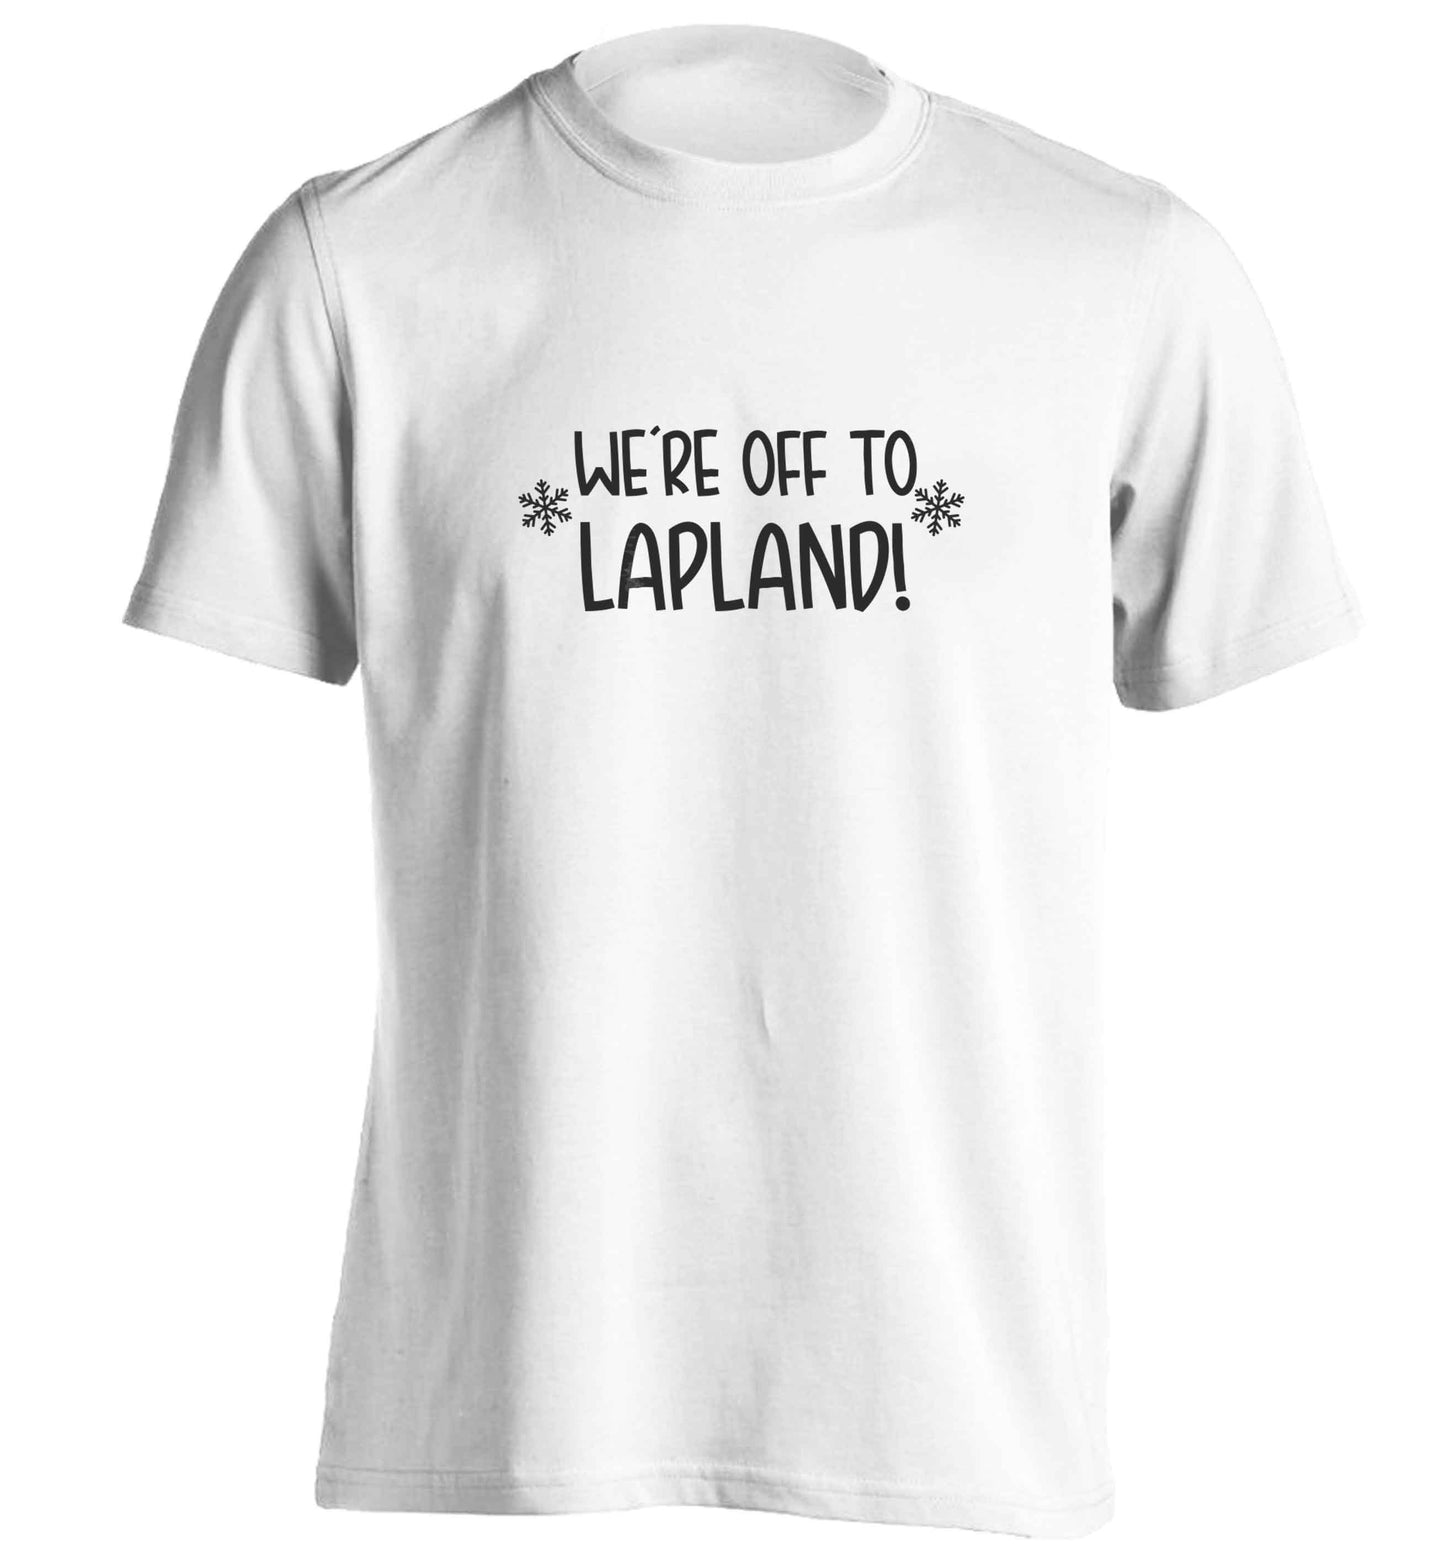 We're off to Lapland adults unisex white Tshirt 2XL